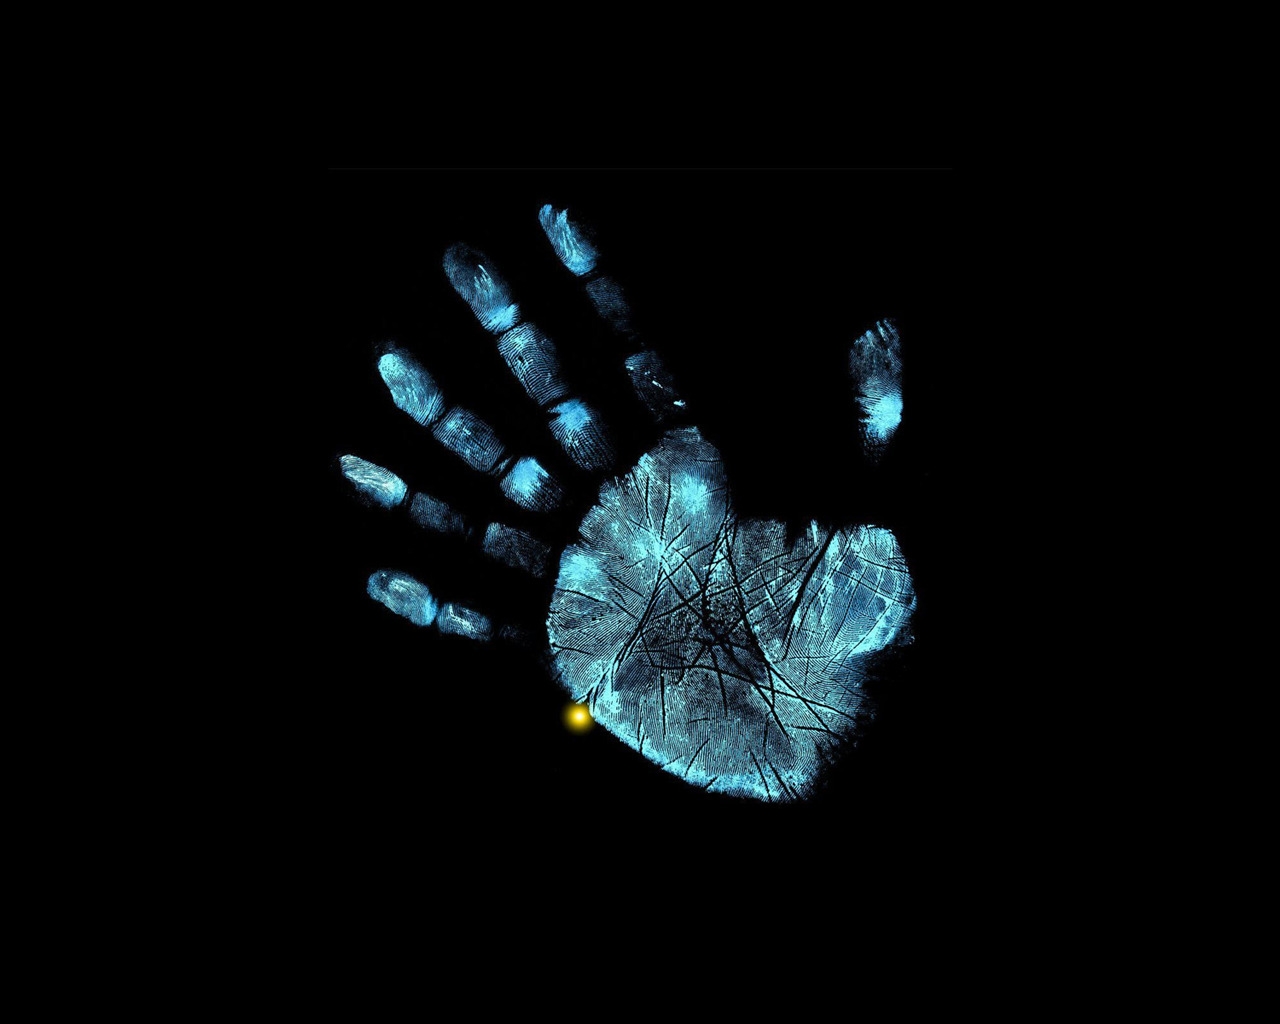 Abnormal Hand for 1280 x 1024 resolution